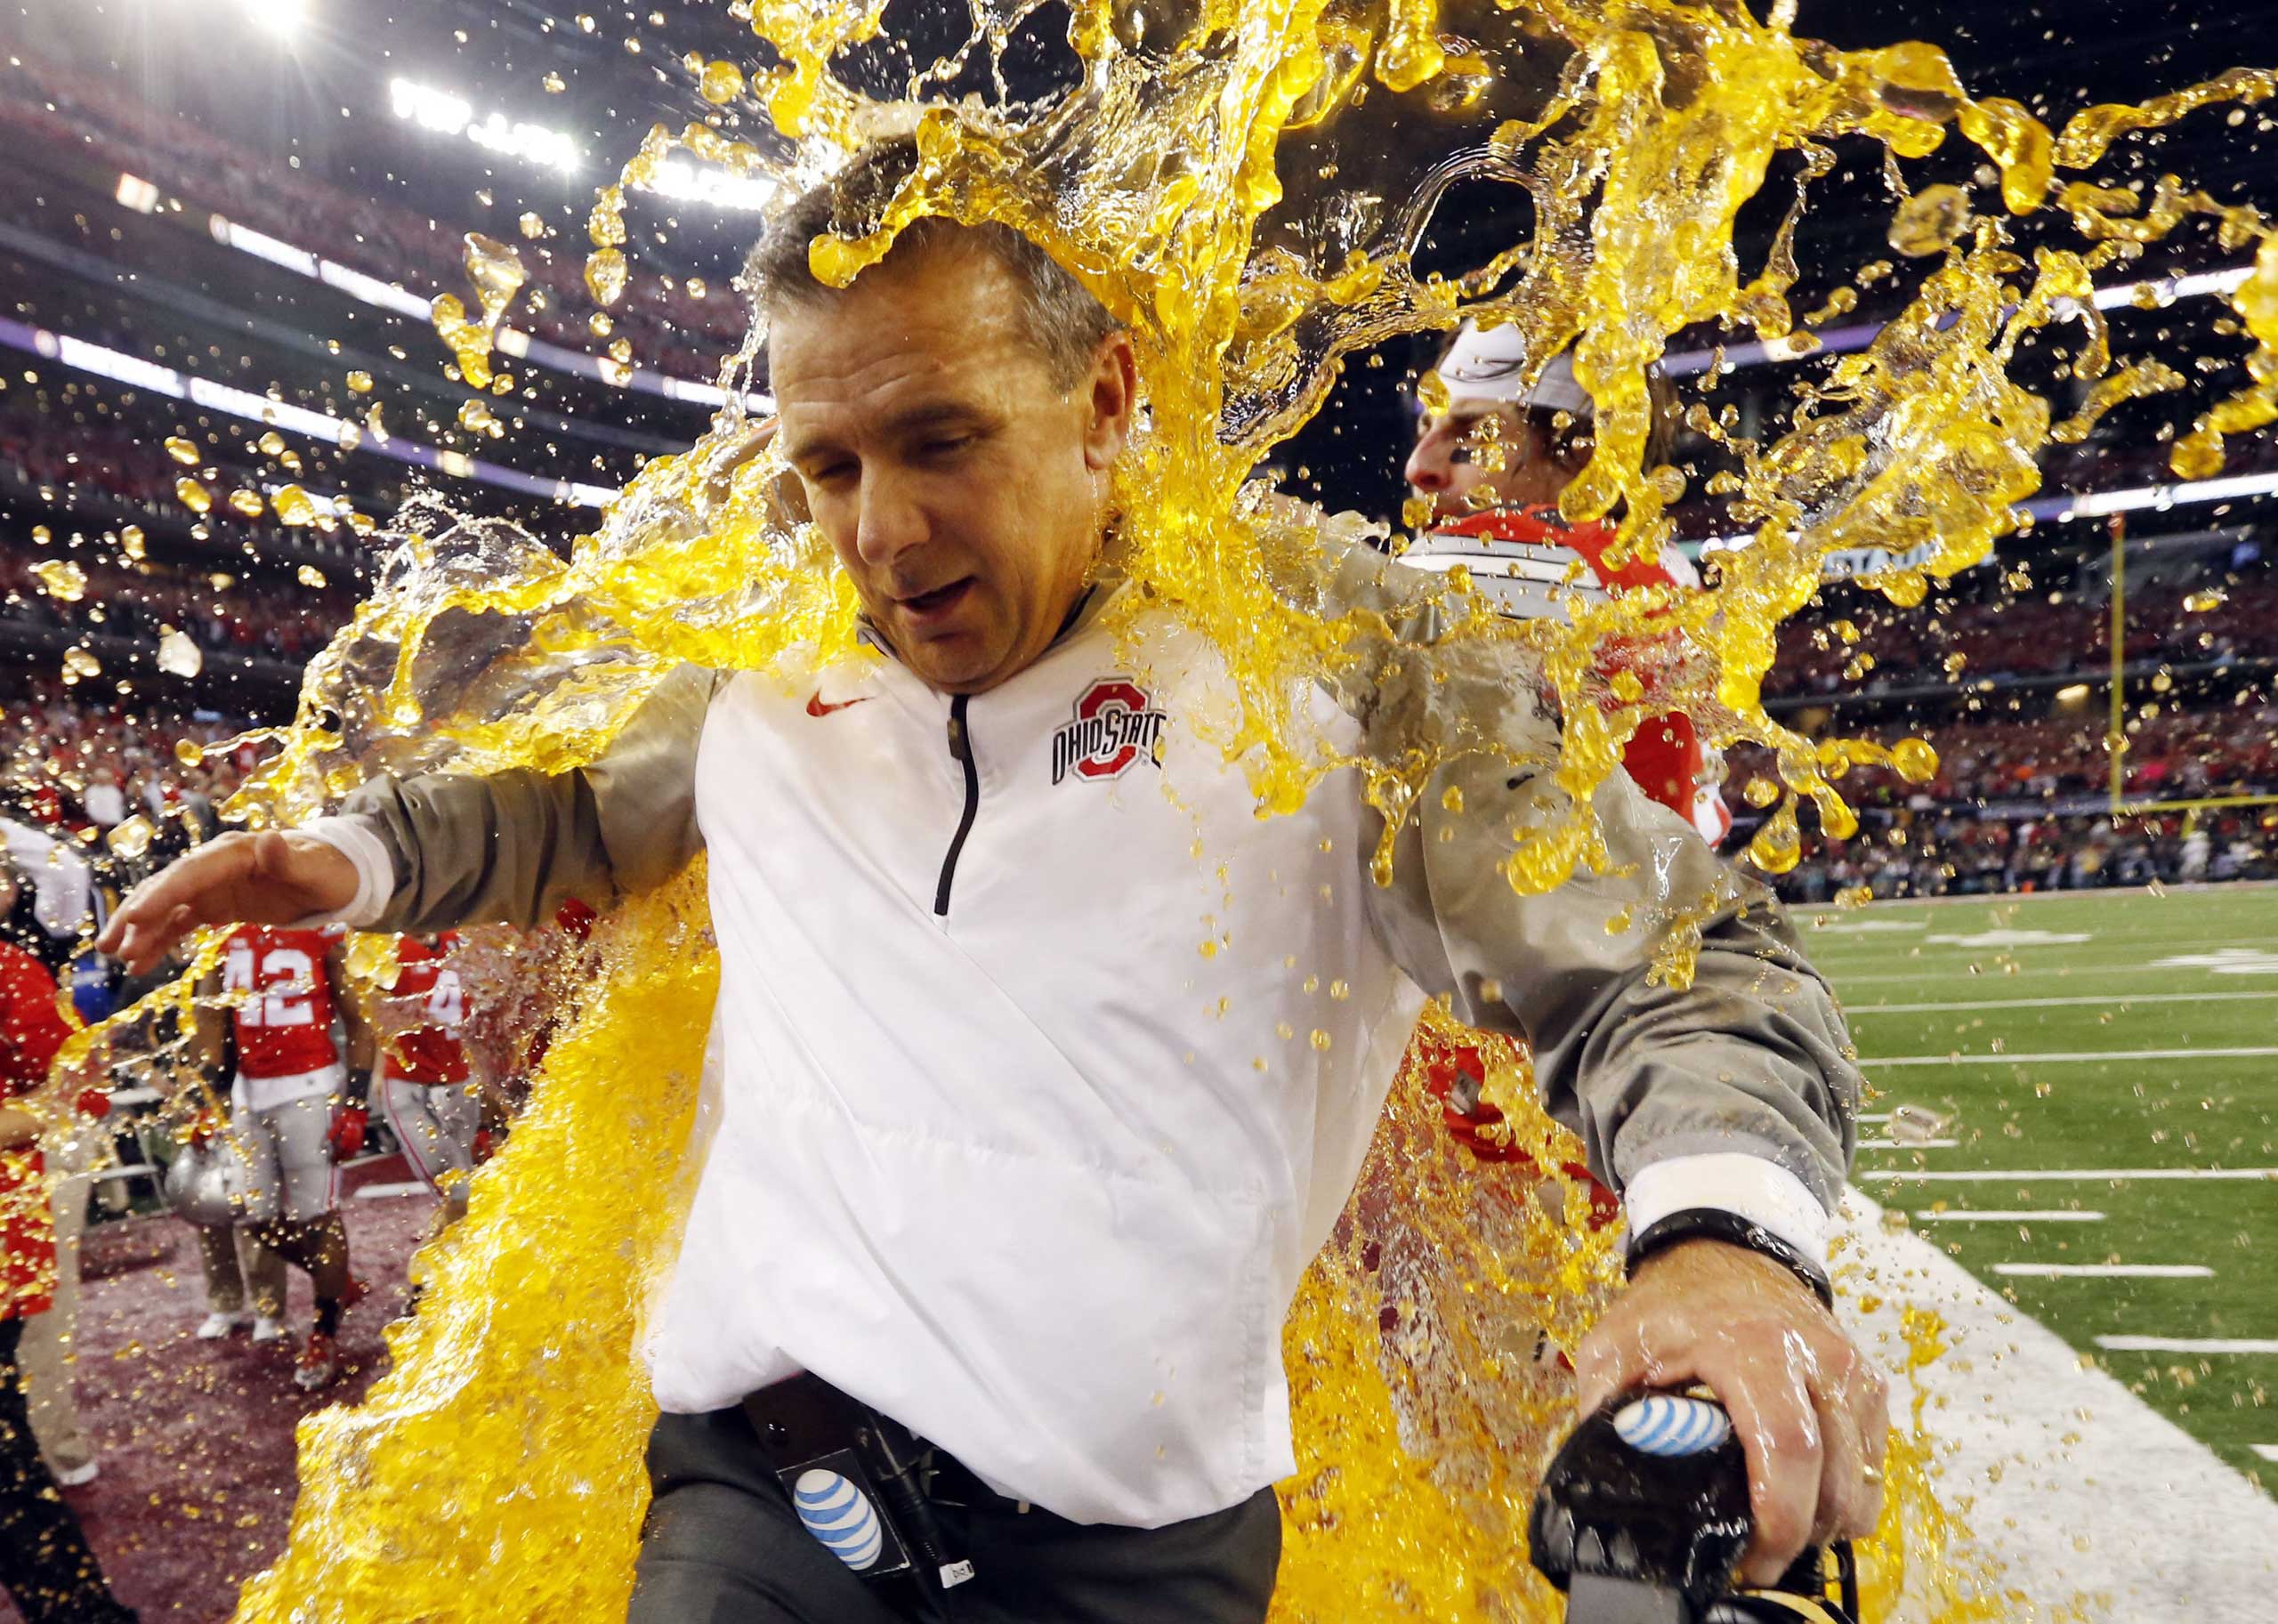 Ohio State head coach Urban Meyer is dunked with Gatorade during the NCAA college football playoff championship game against Oregon on Jan. 12, 2015, in Arlington, Texas.